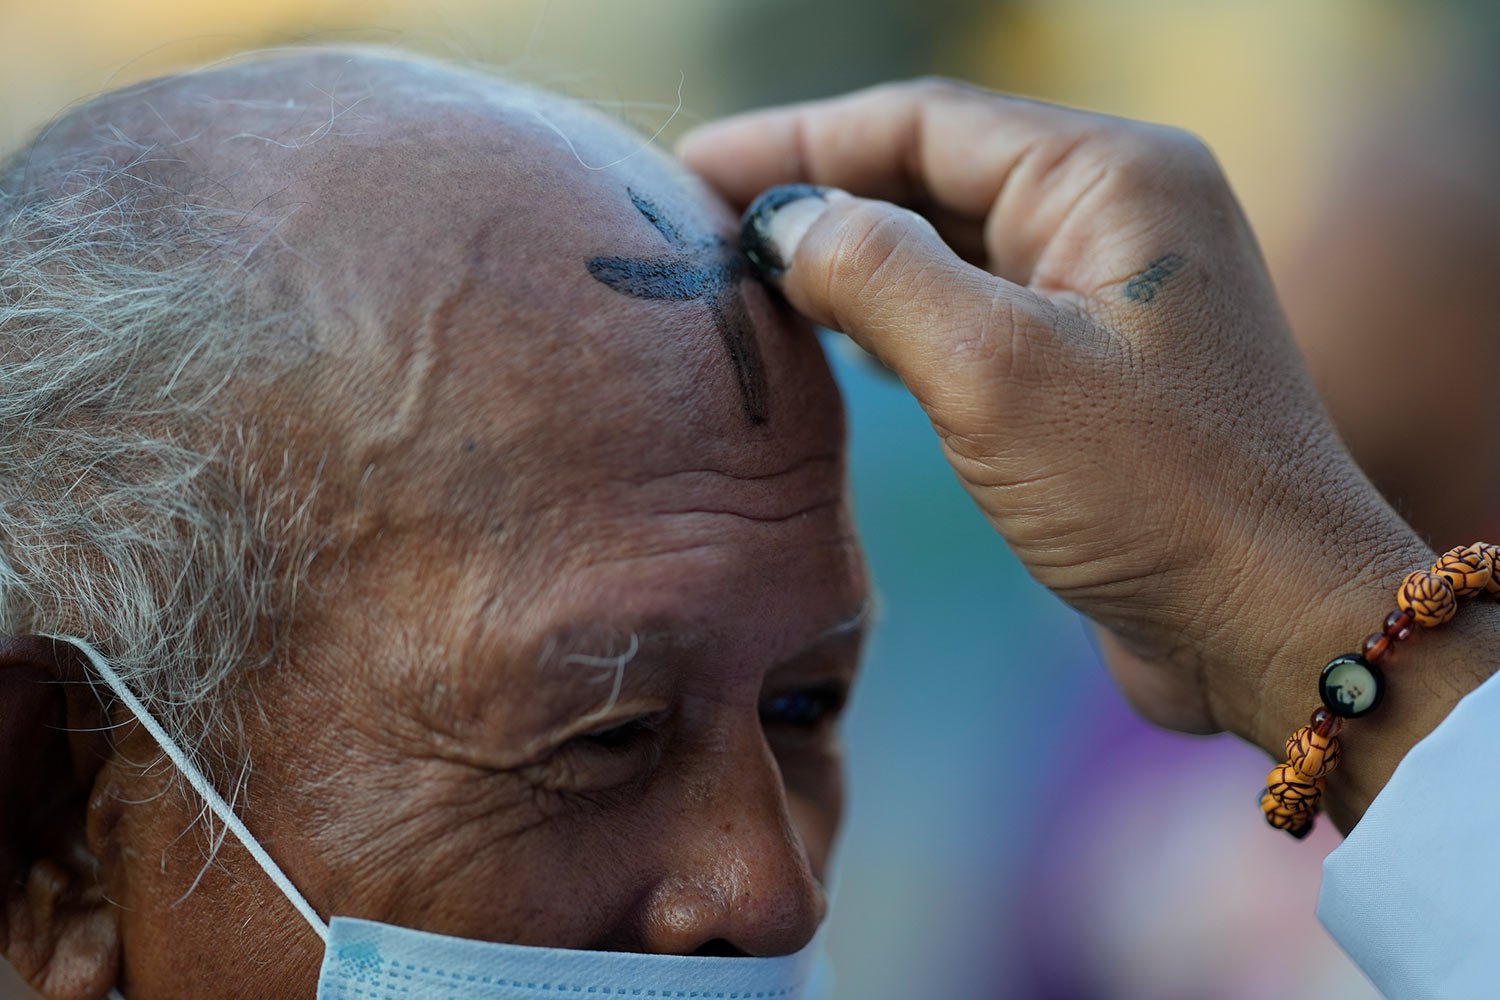  A lay minister places ash on the forehead of a devotee during Ash Wednesday rites Feb. 22, 2023, outside a church in downtown Manila, Philippines. (AP Photo/Aaron Favila) 